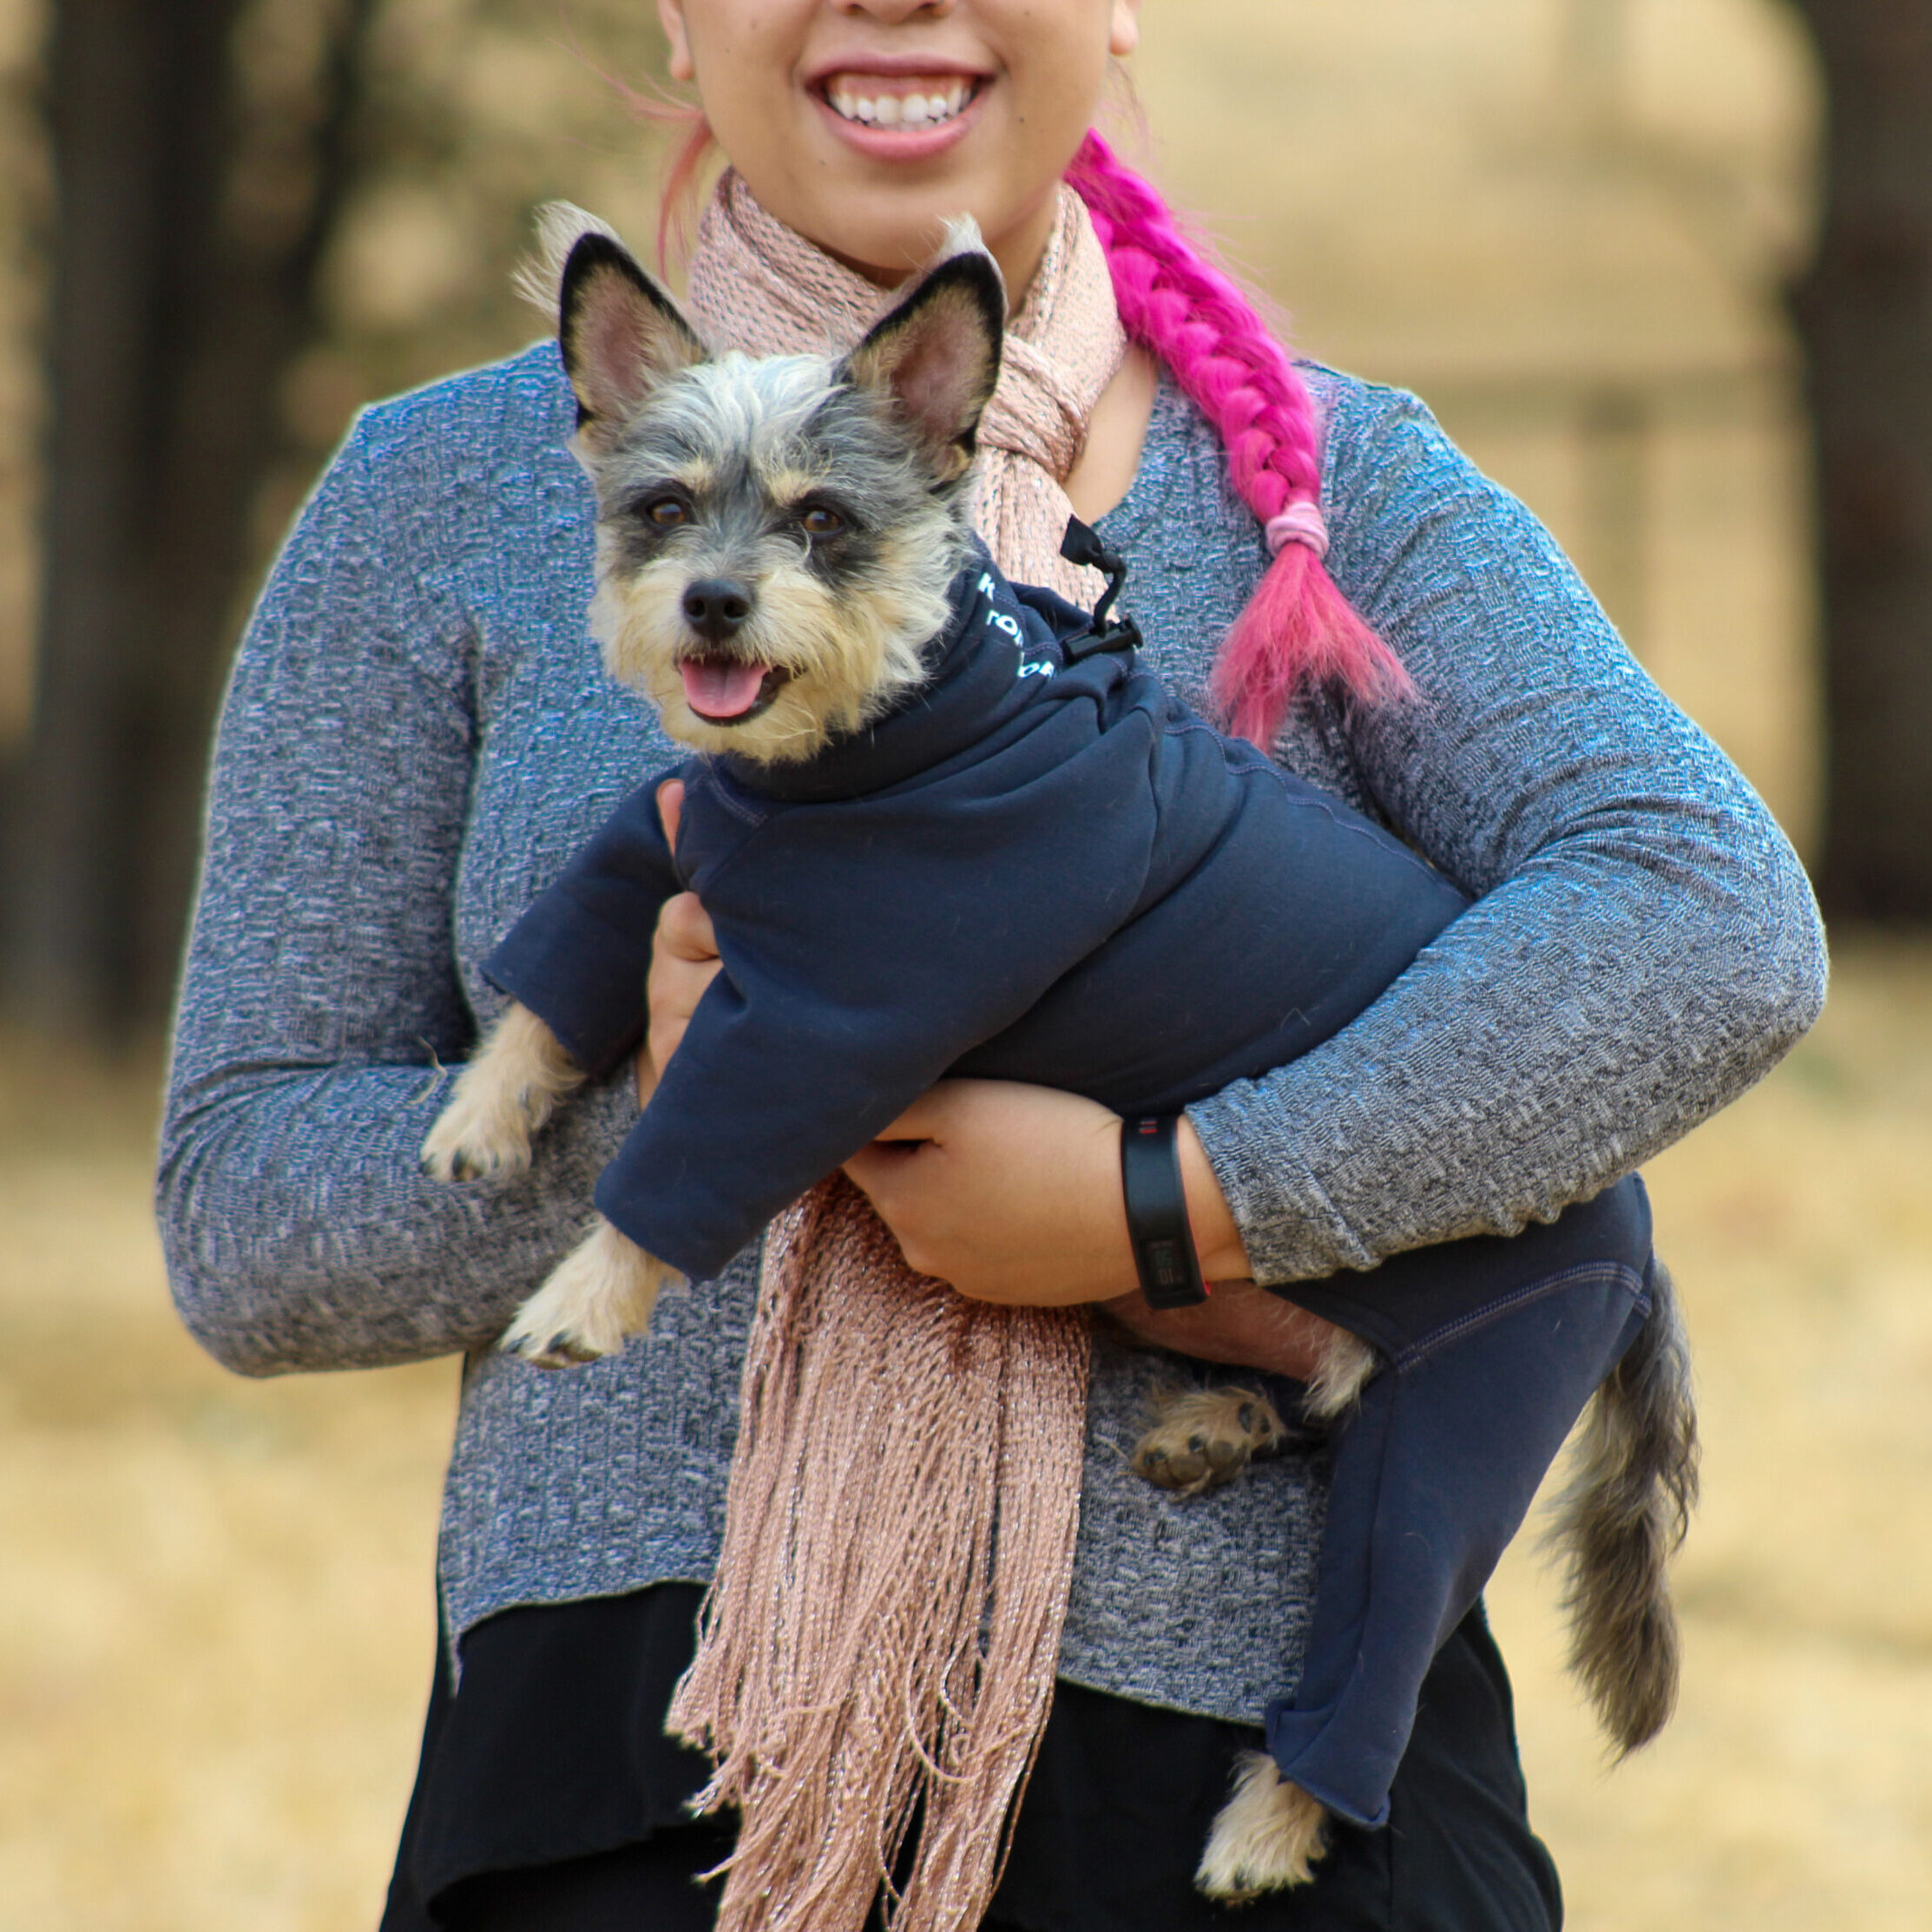 Woman Holding Small Dog in Bodysuit